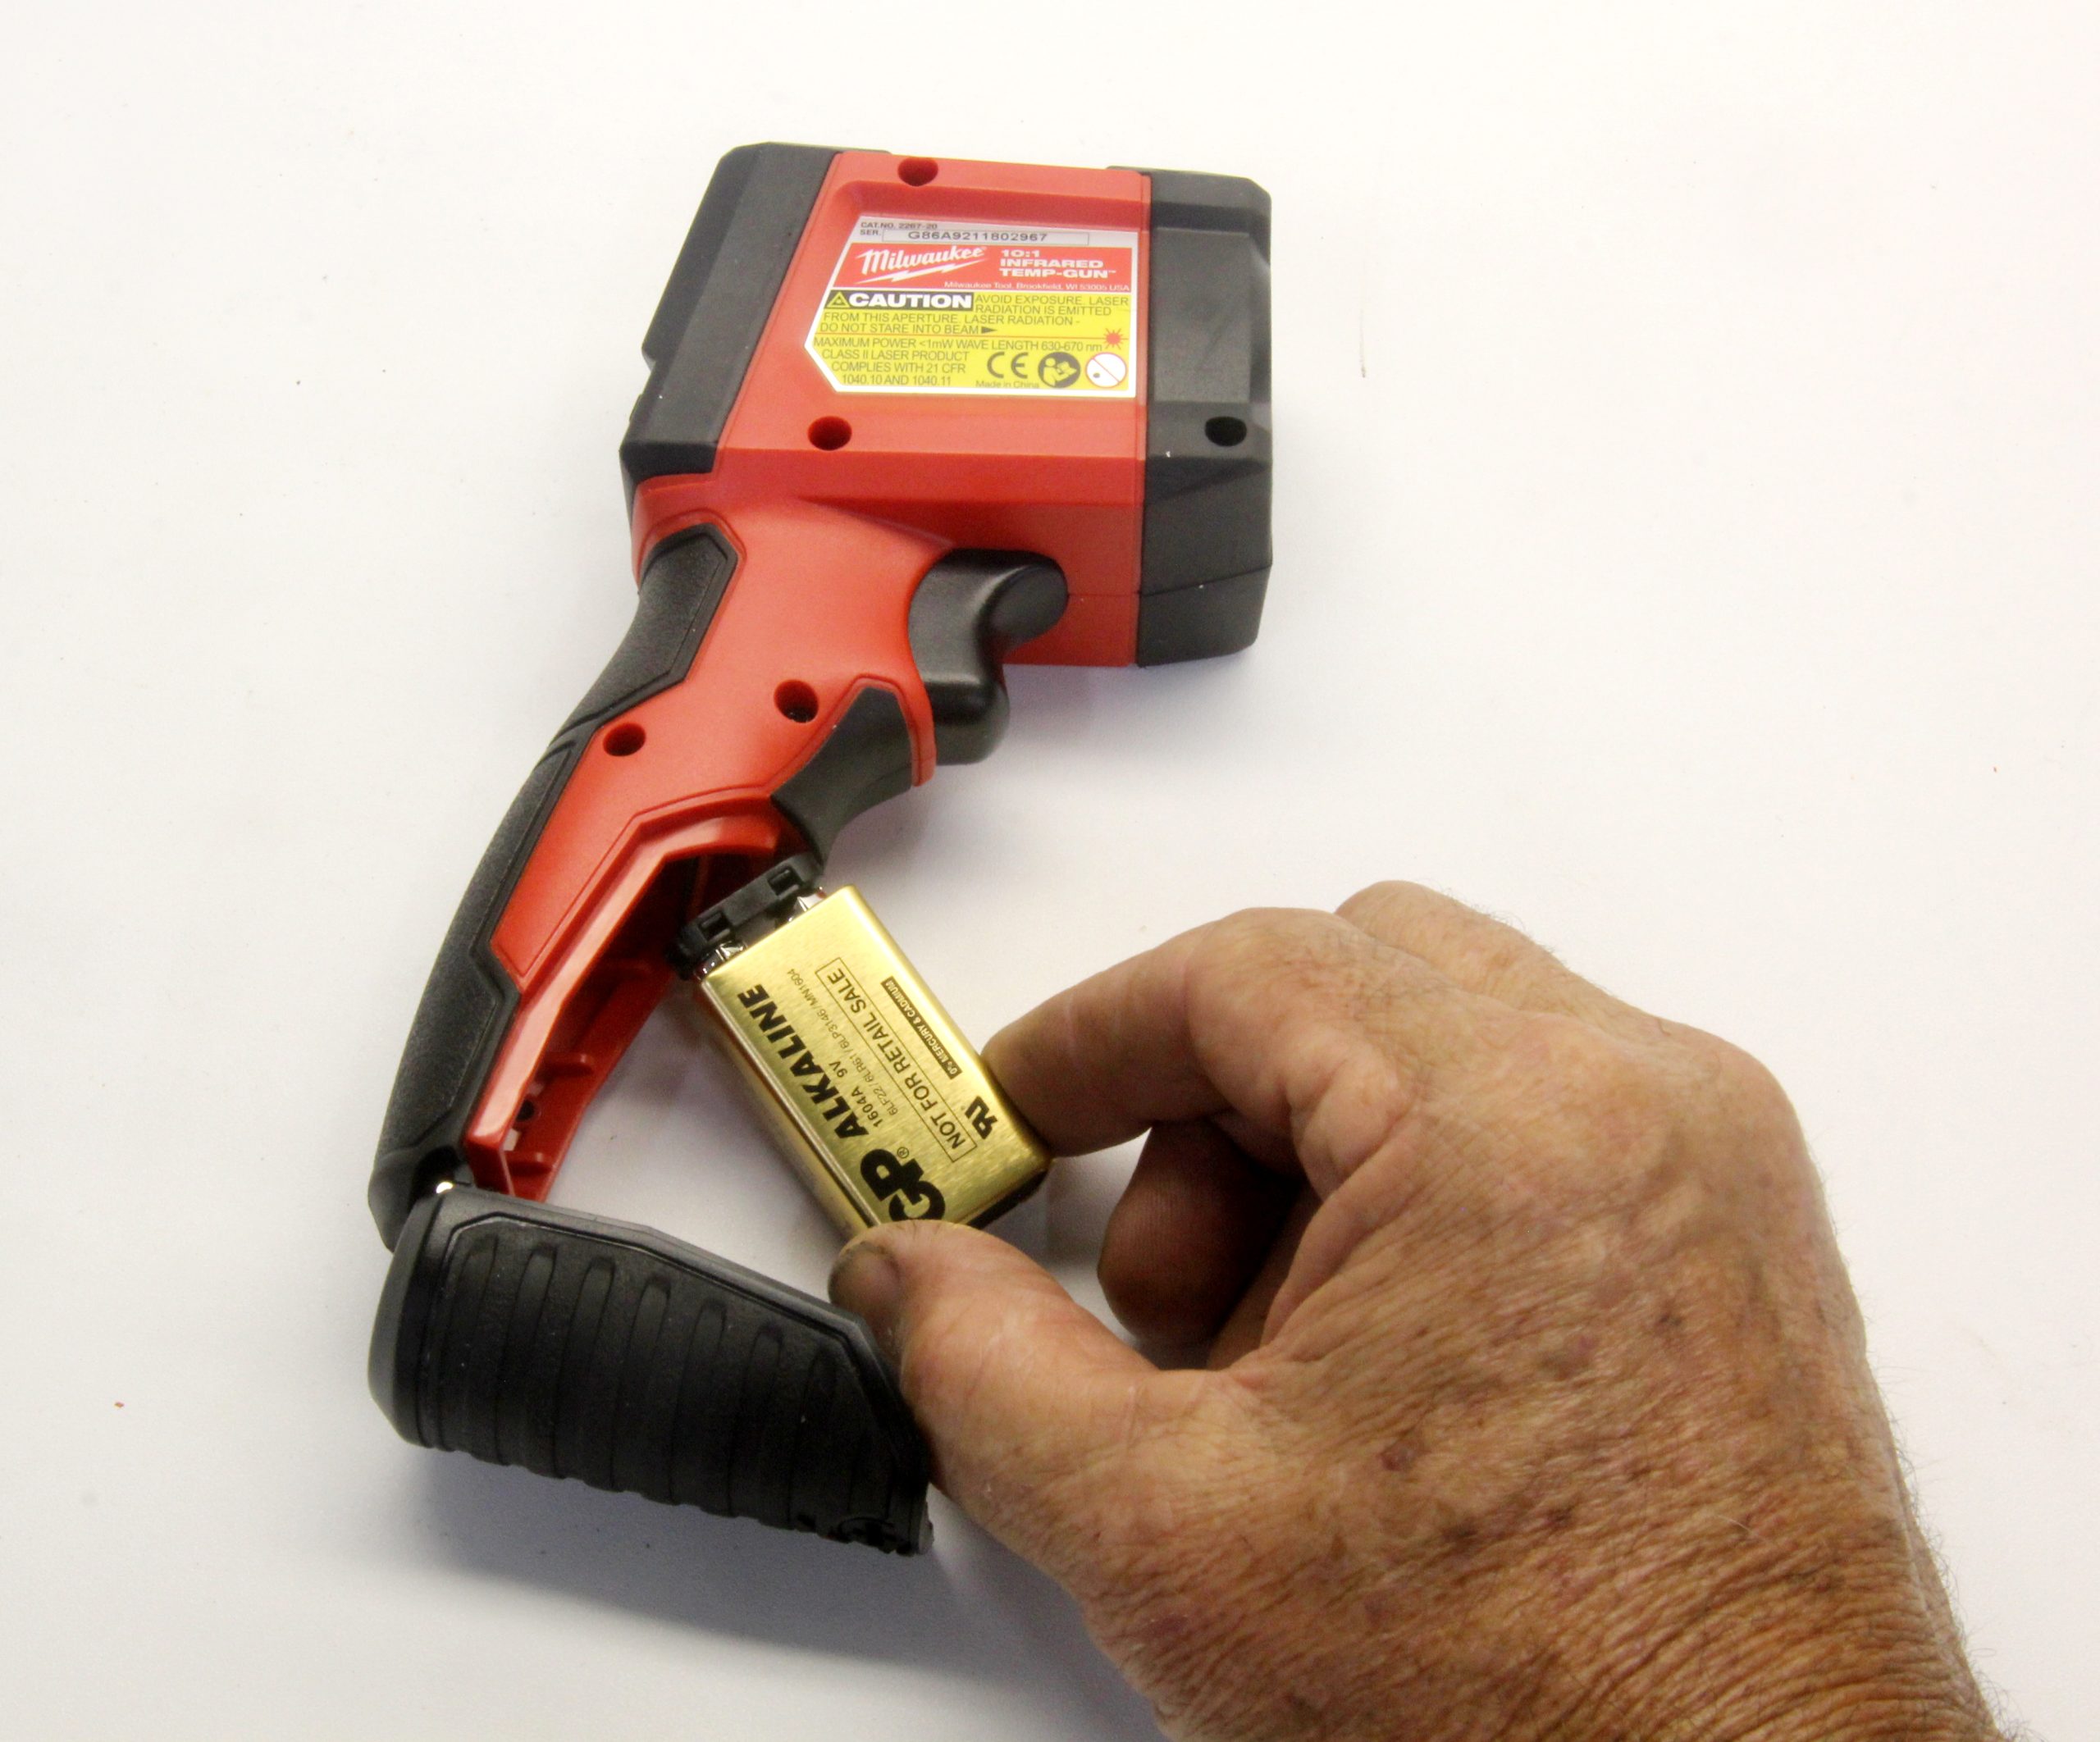 https://www.onallcylinders.com/wp-content/uploads/2022/09/21/installing-battery-in-milwaukee-tool-infrared-temperature-thermometer-gun-scaled.jpg